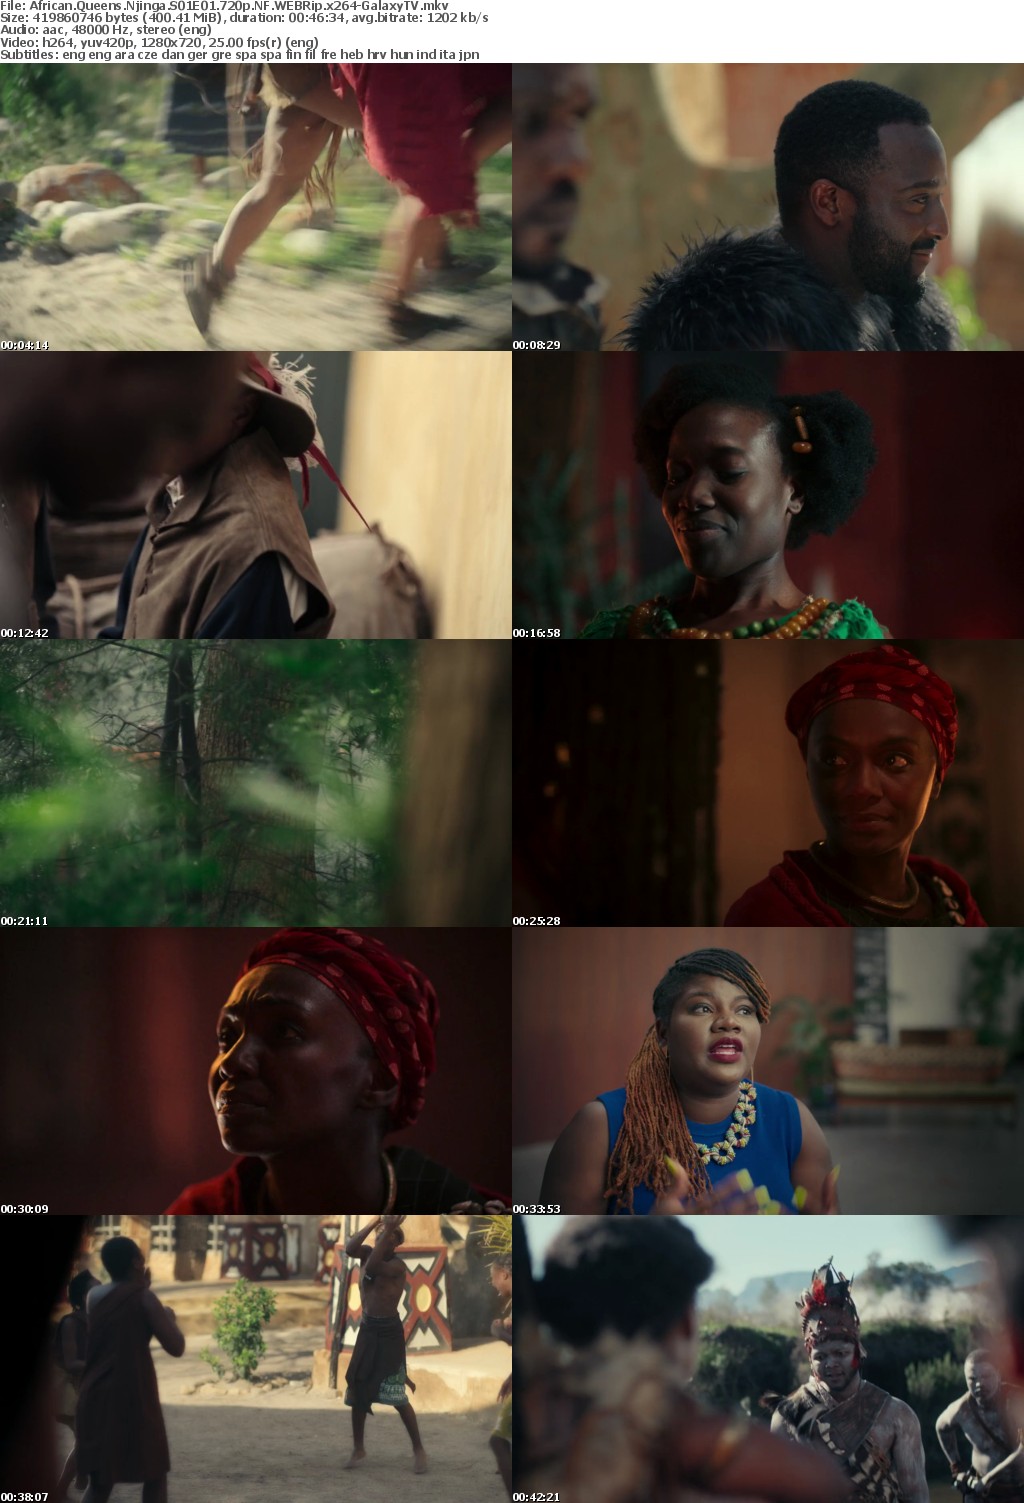 African Queens Njinga S01 COMPLETE 720p NF WEBRip x264-GalaxyTV